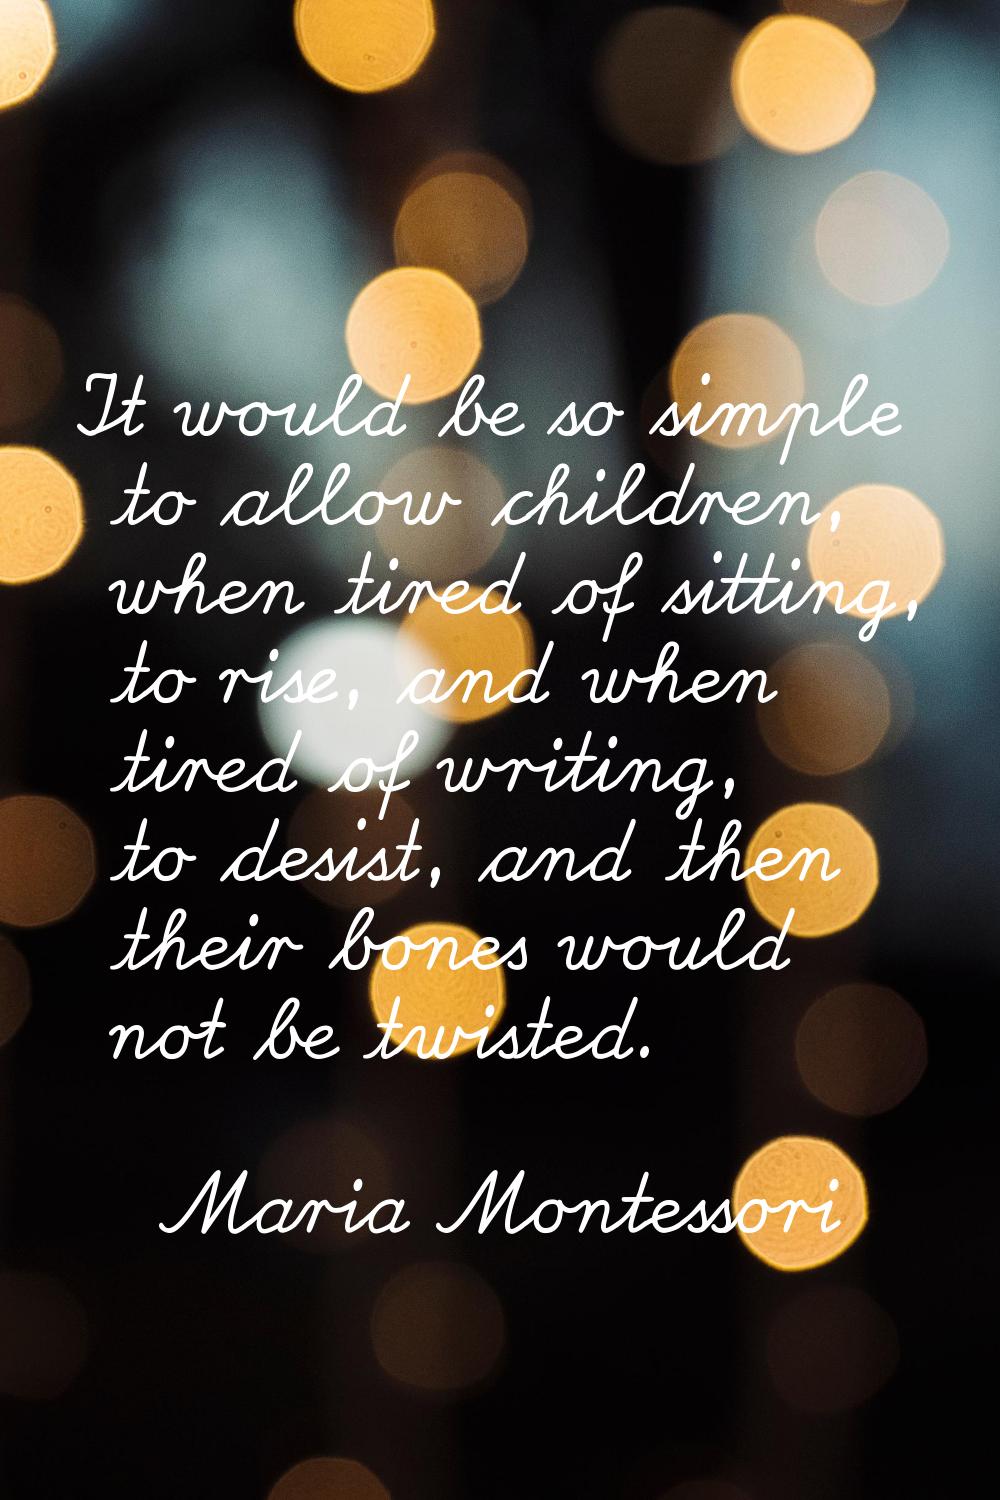 It would be so simple to allow children, when tired of sitting, to rise, and when tired of writing,